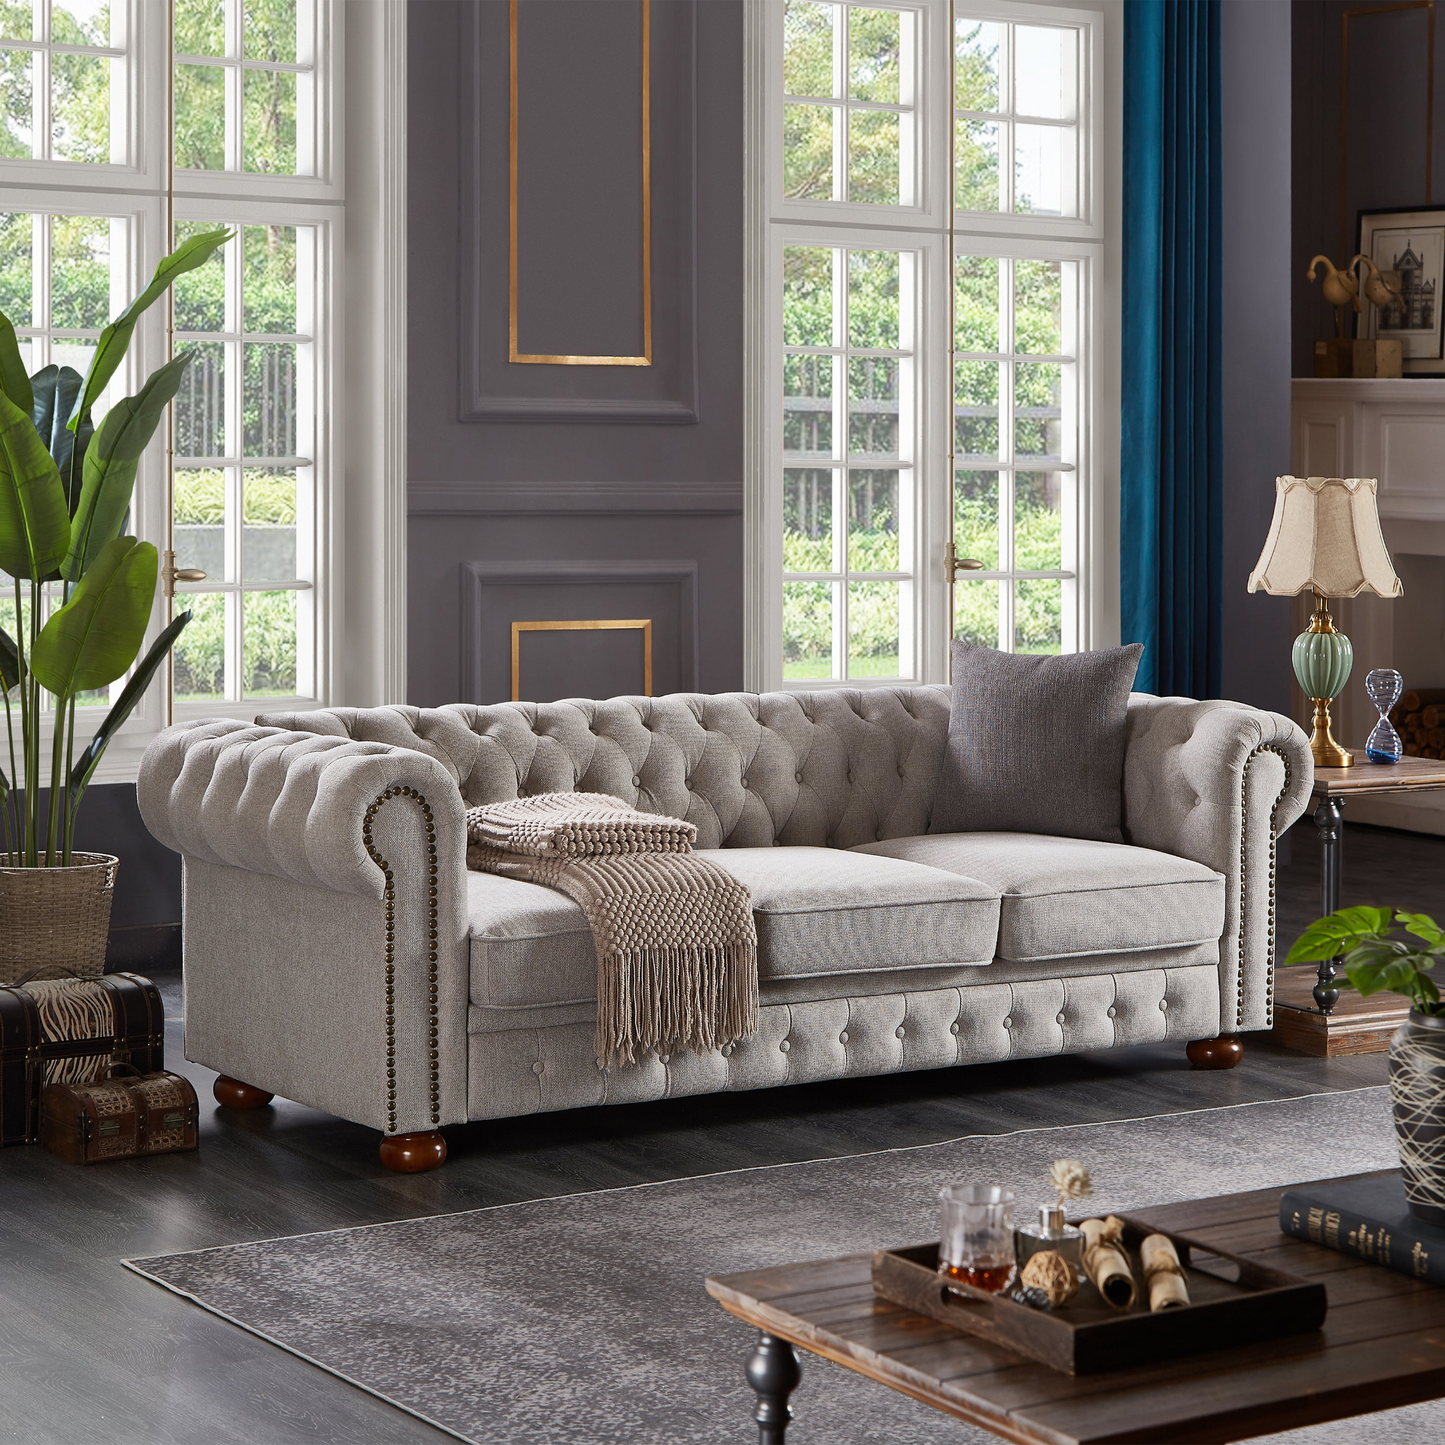 Chesterfield Sofa In Linen Fabric - Light Grey